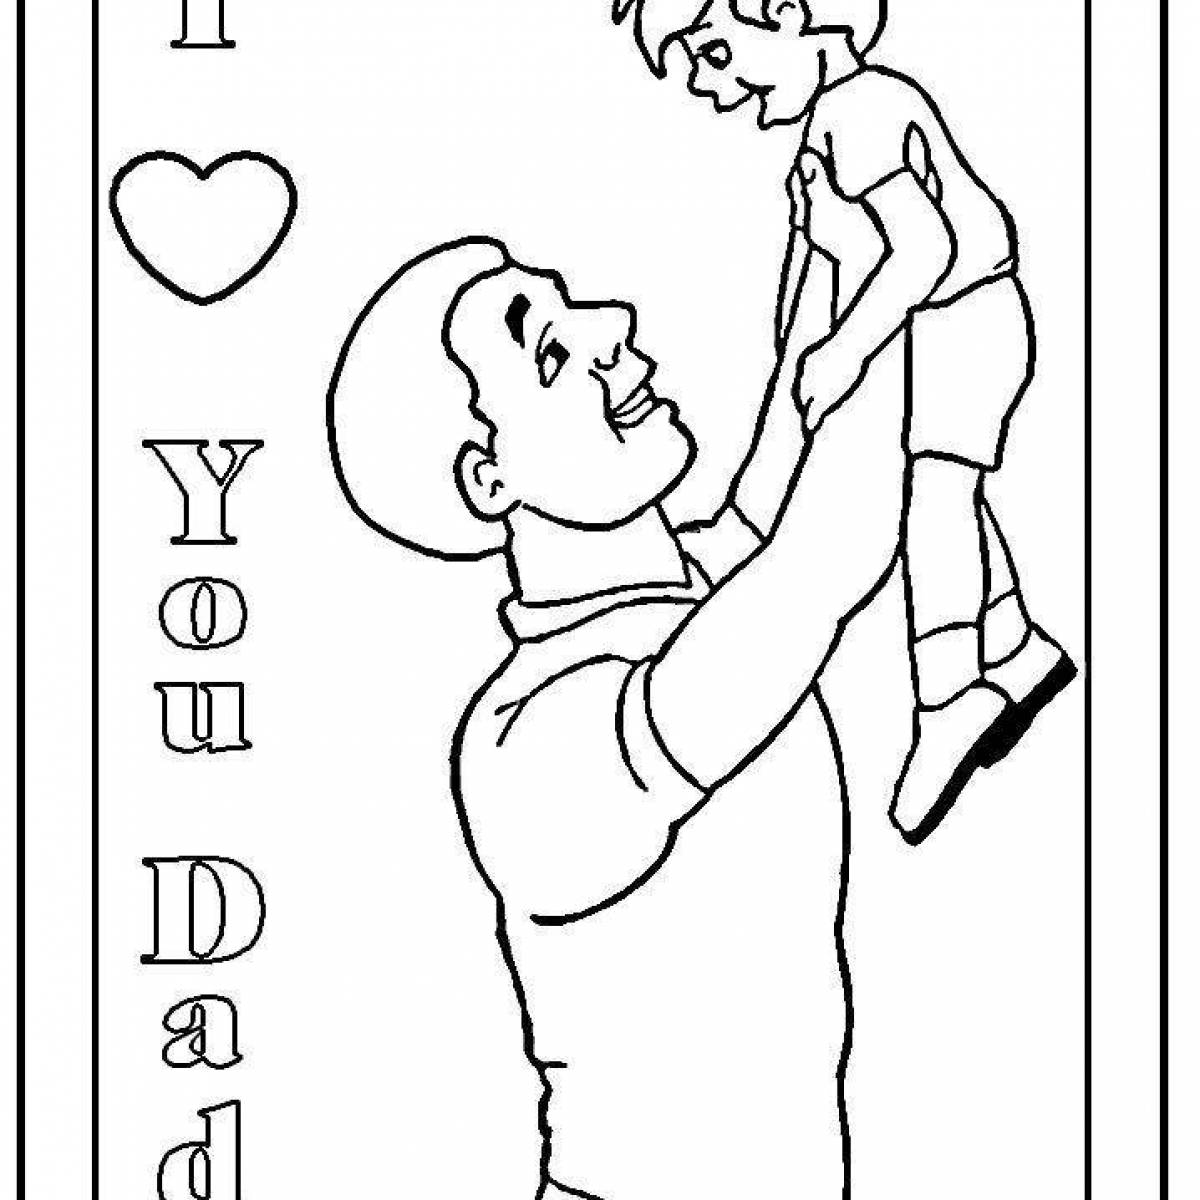 Exquisite happy birthday coloring for dad from daughter